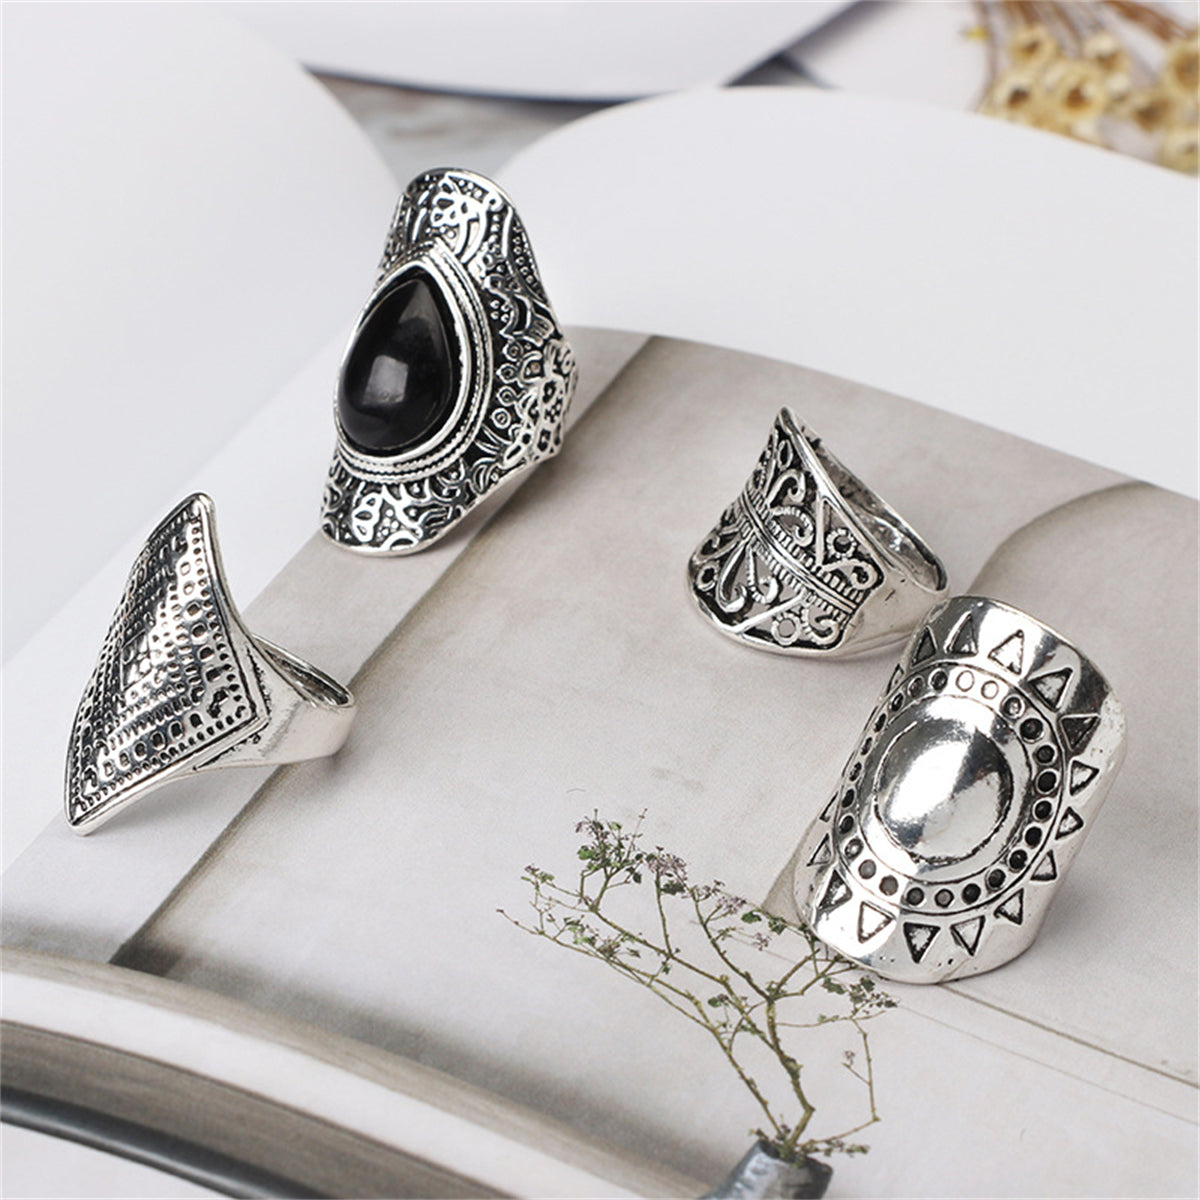 Black Resin & Silver-Plated Wide Engraved Sun Pear Ring Set